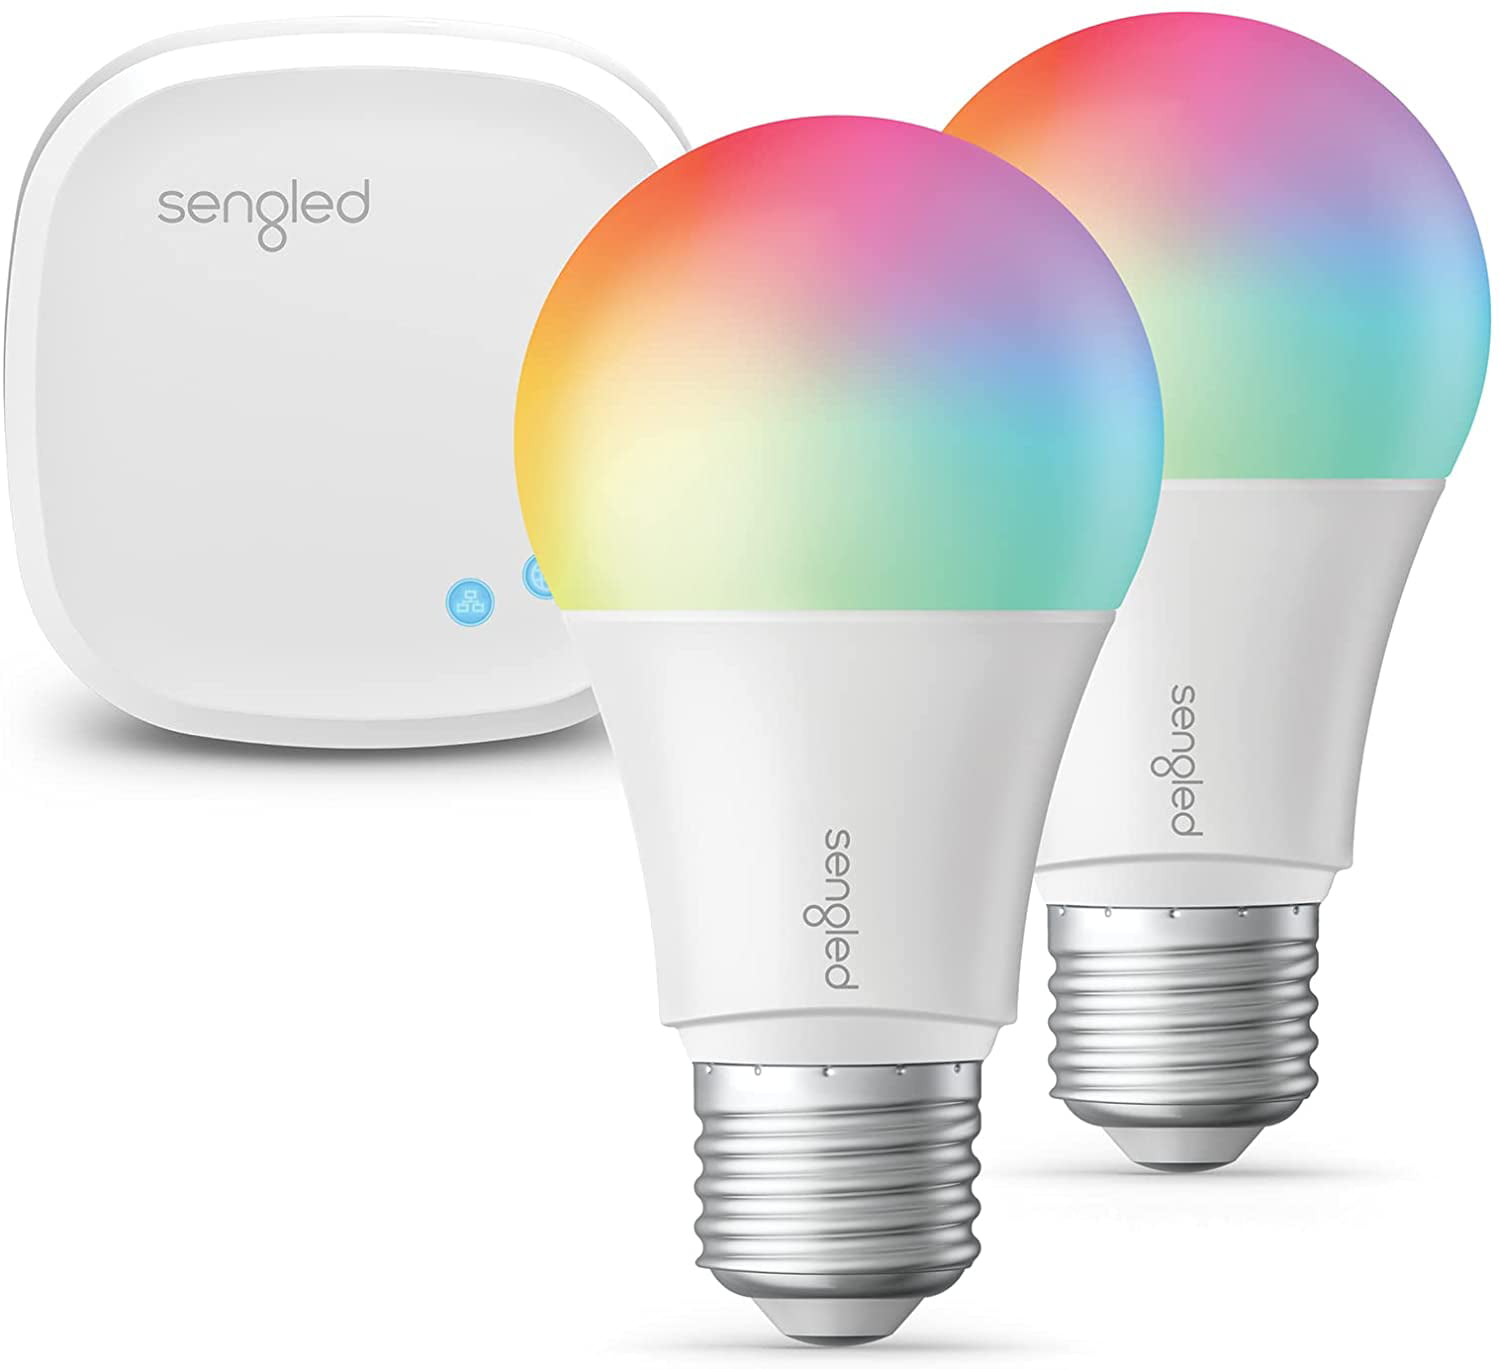 Google Home Color Changing Dimmable Smart Light Bulb That Compatible with Alexa Sengled Smart Light Bulb 3 Pack SmartThings & IFTTT Smart Hub Required Smart Bulb Multicolor A19 LED Light 